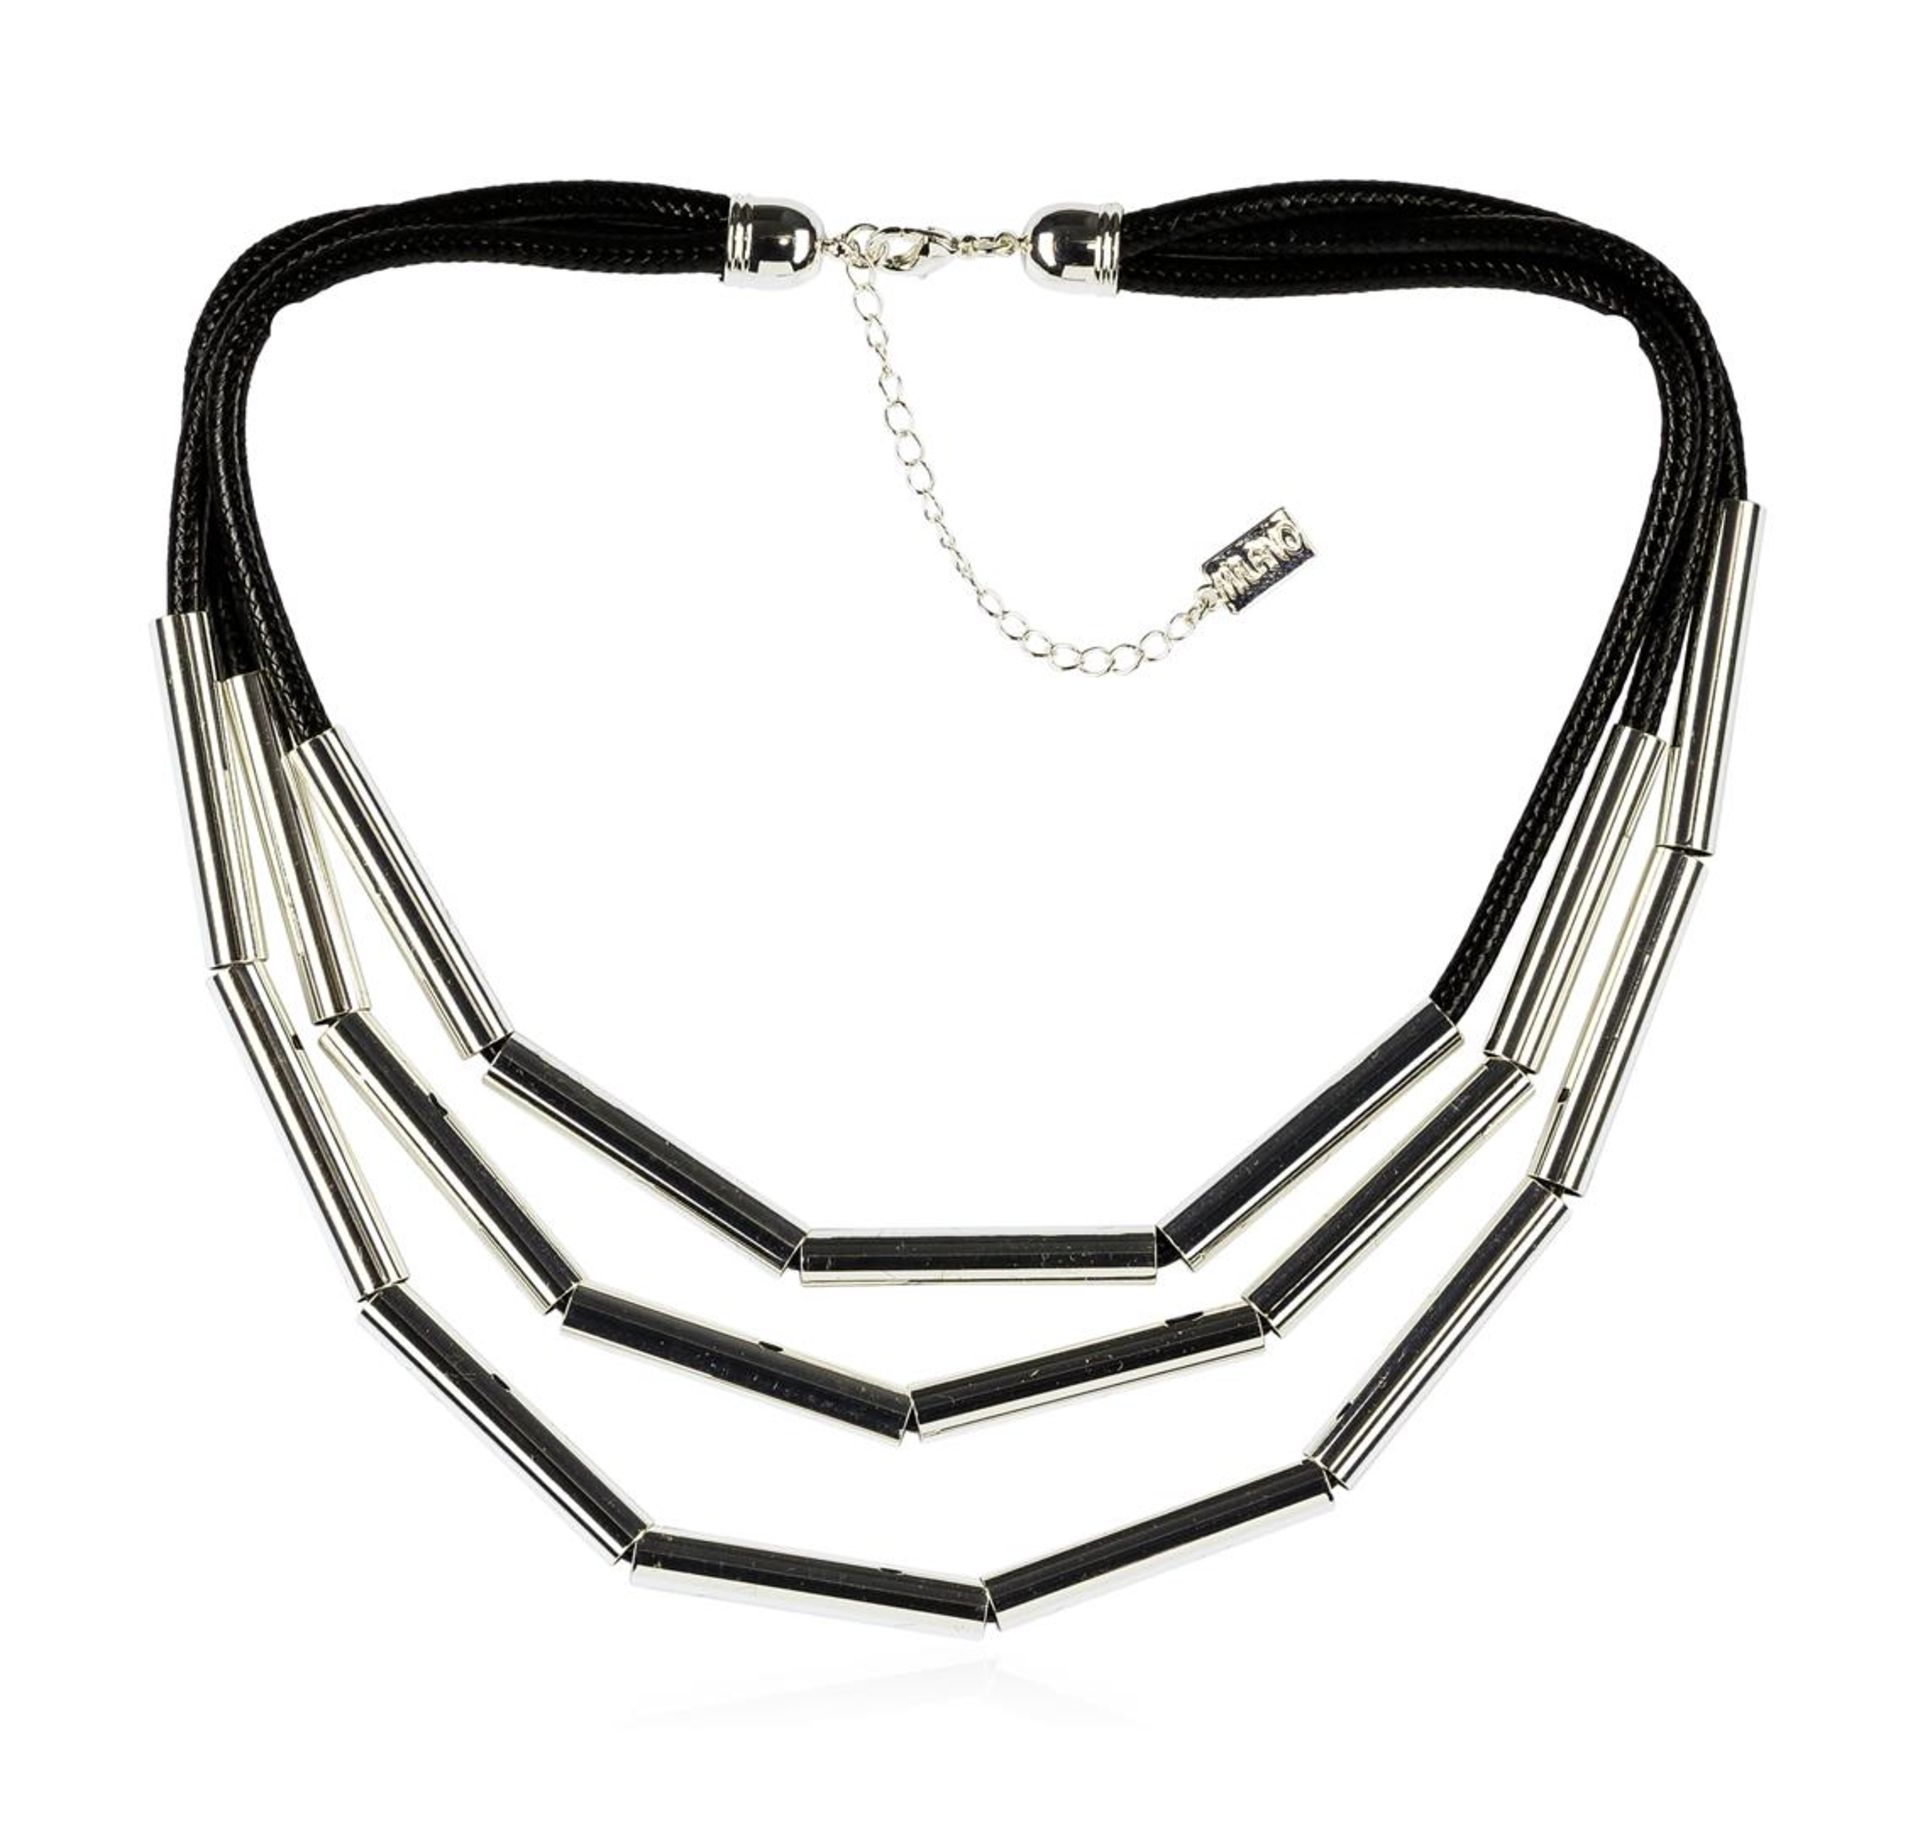 Strand Cord Necklace - Rhodium Plated - Image 2 of 2